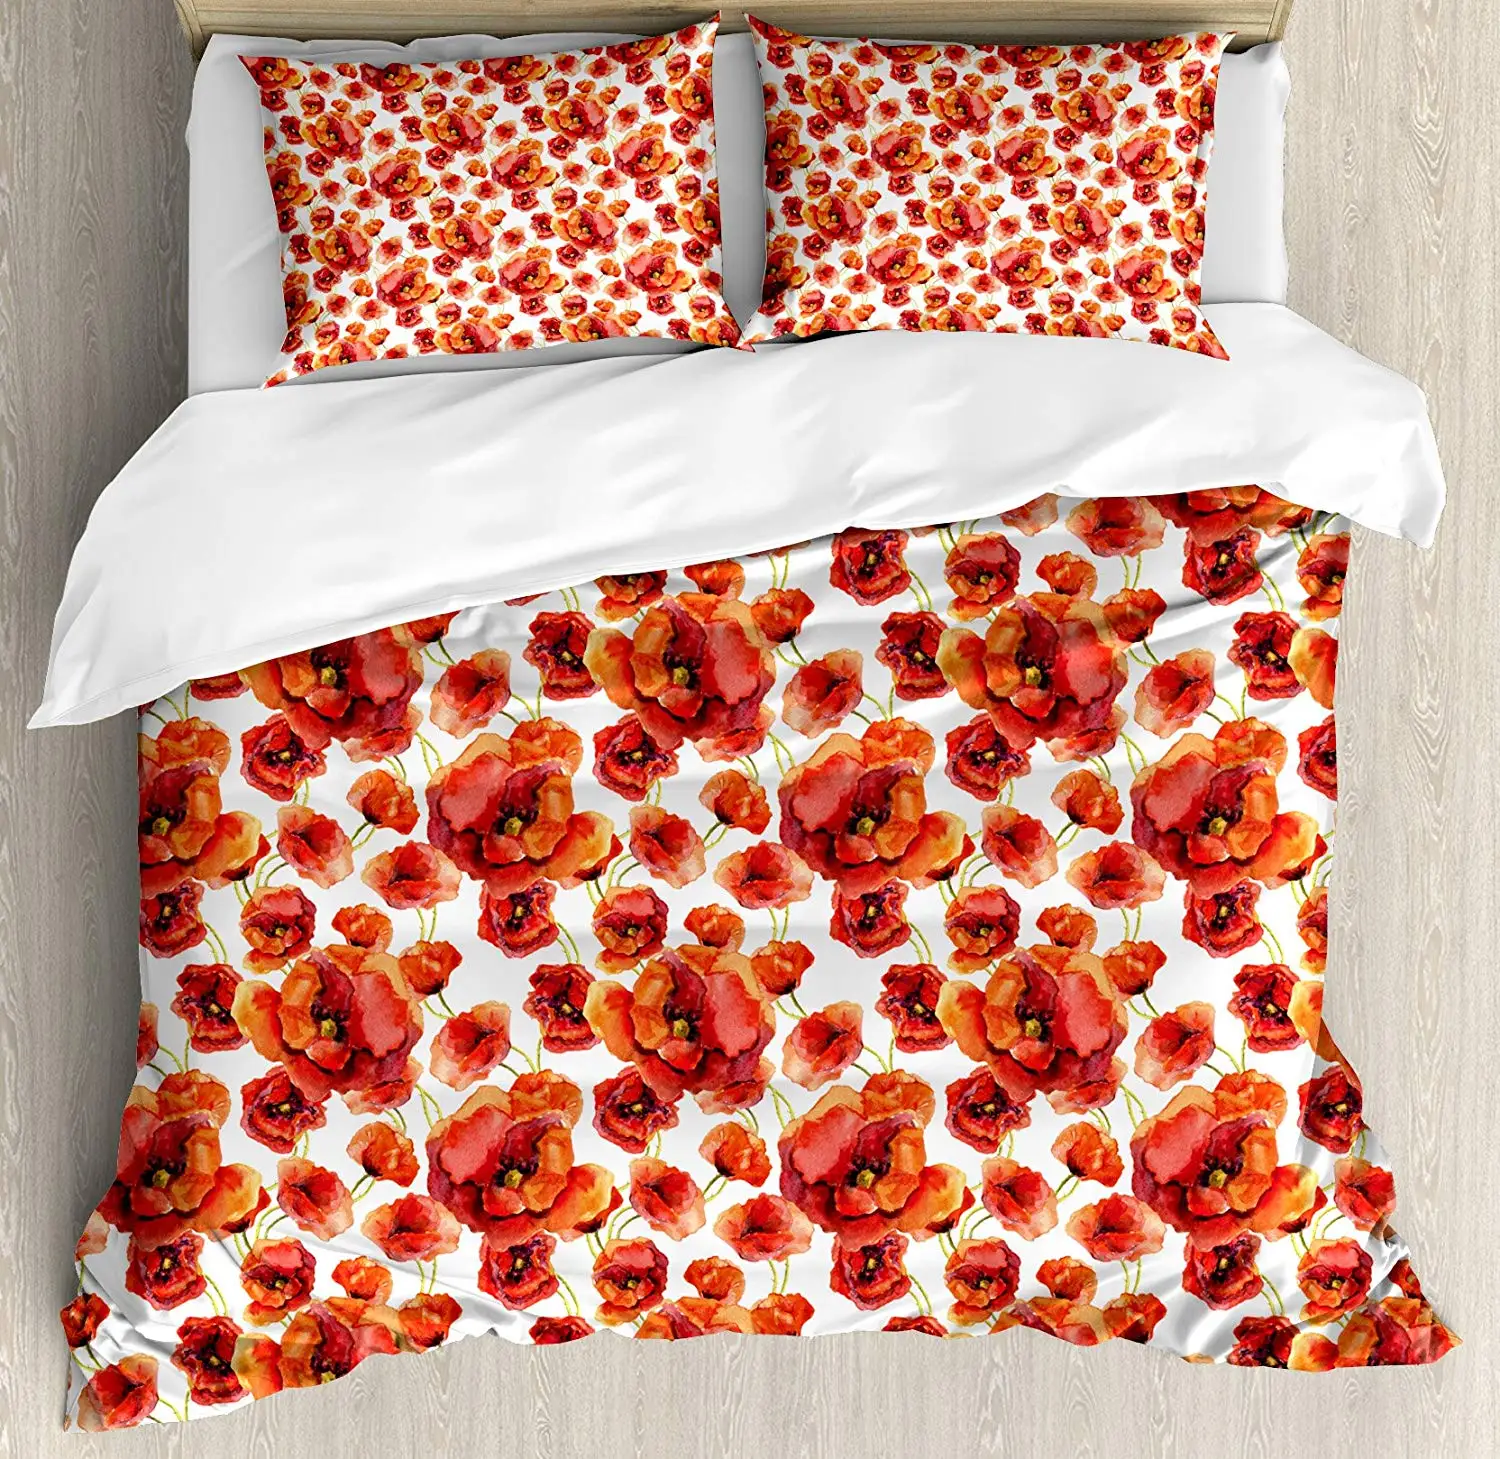 3 Pcs Comforter Qulit Cover Set With 2 Pillow Cases Red And White